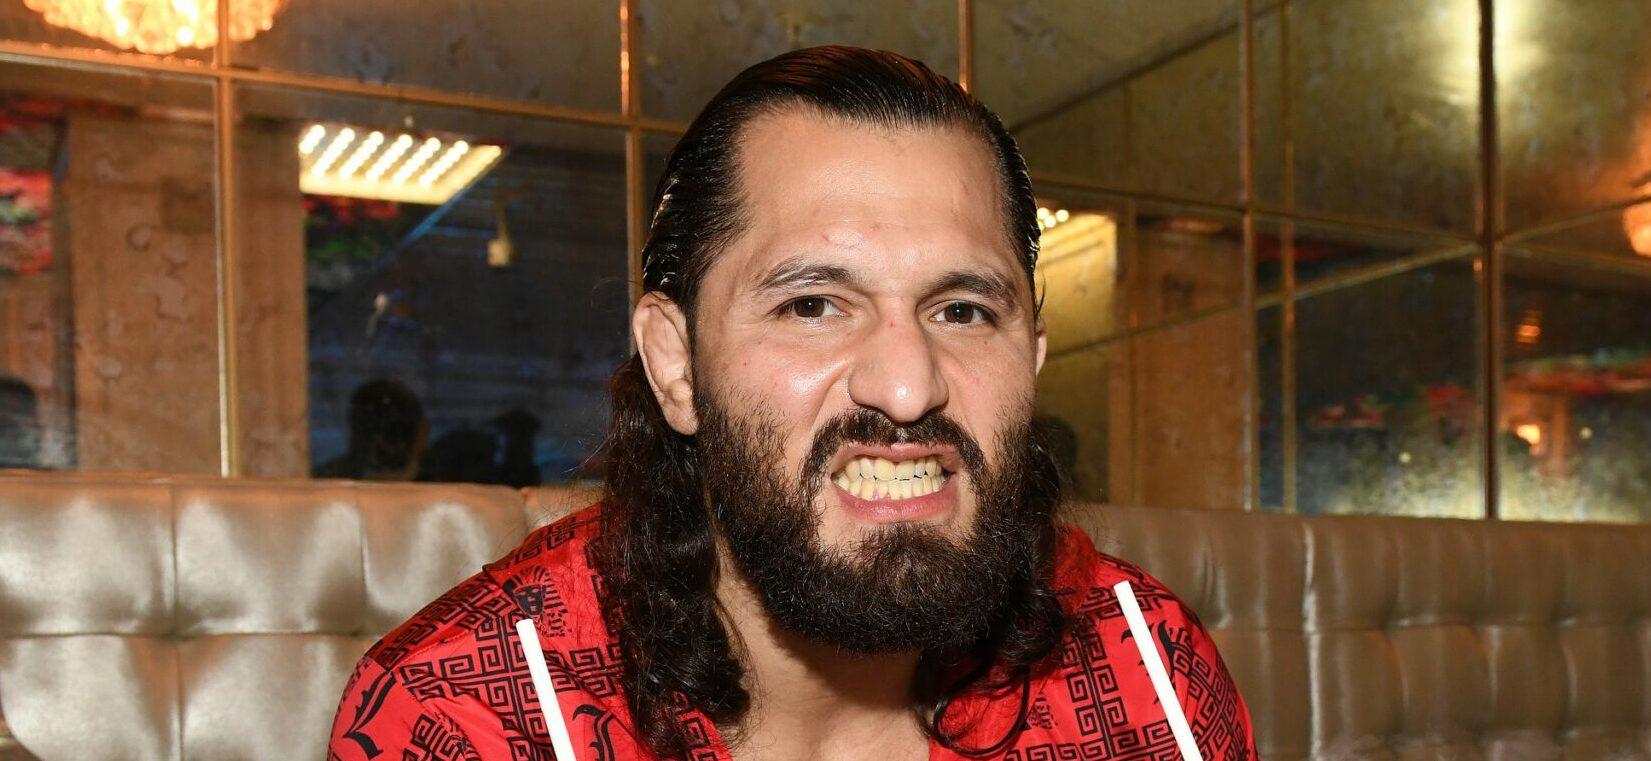 UFC star Jorge Masvidal who was supposed to go campaigning with Donald Trump this week appears at the Sugar Factory in Miami Beach